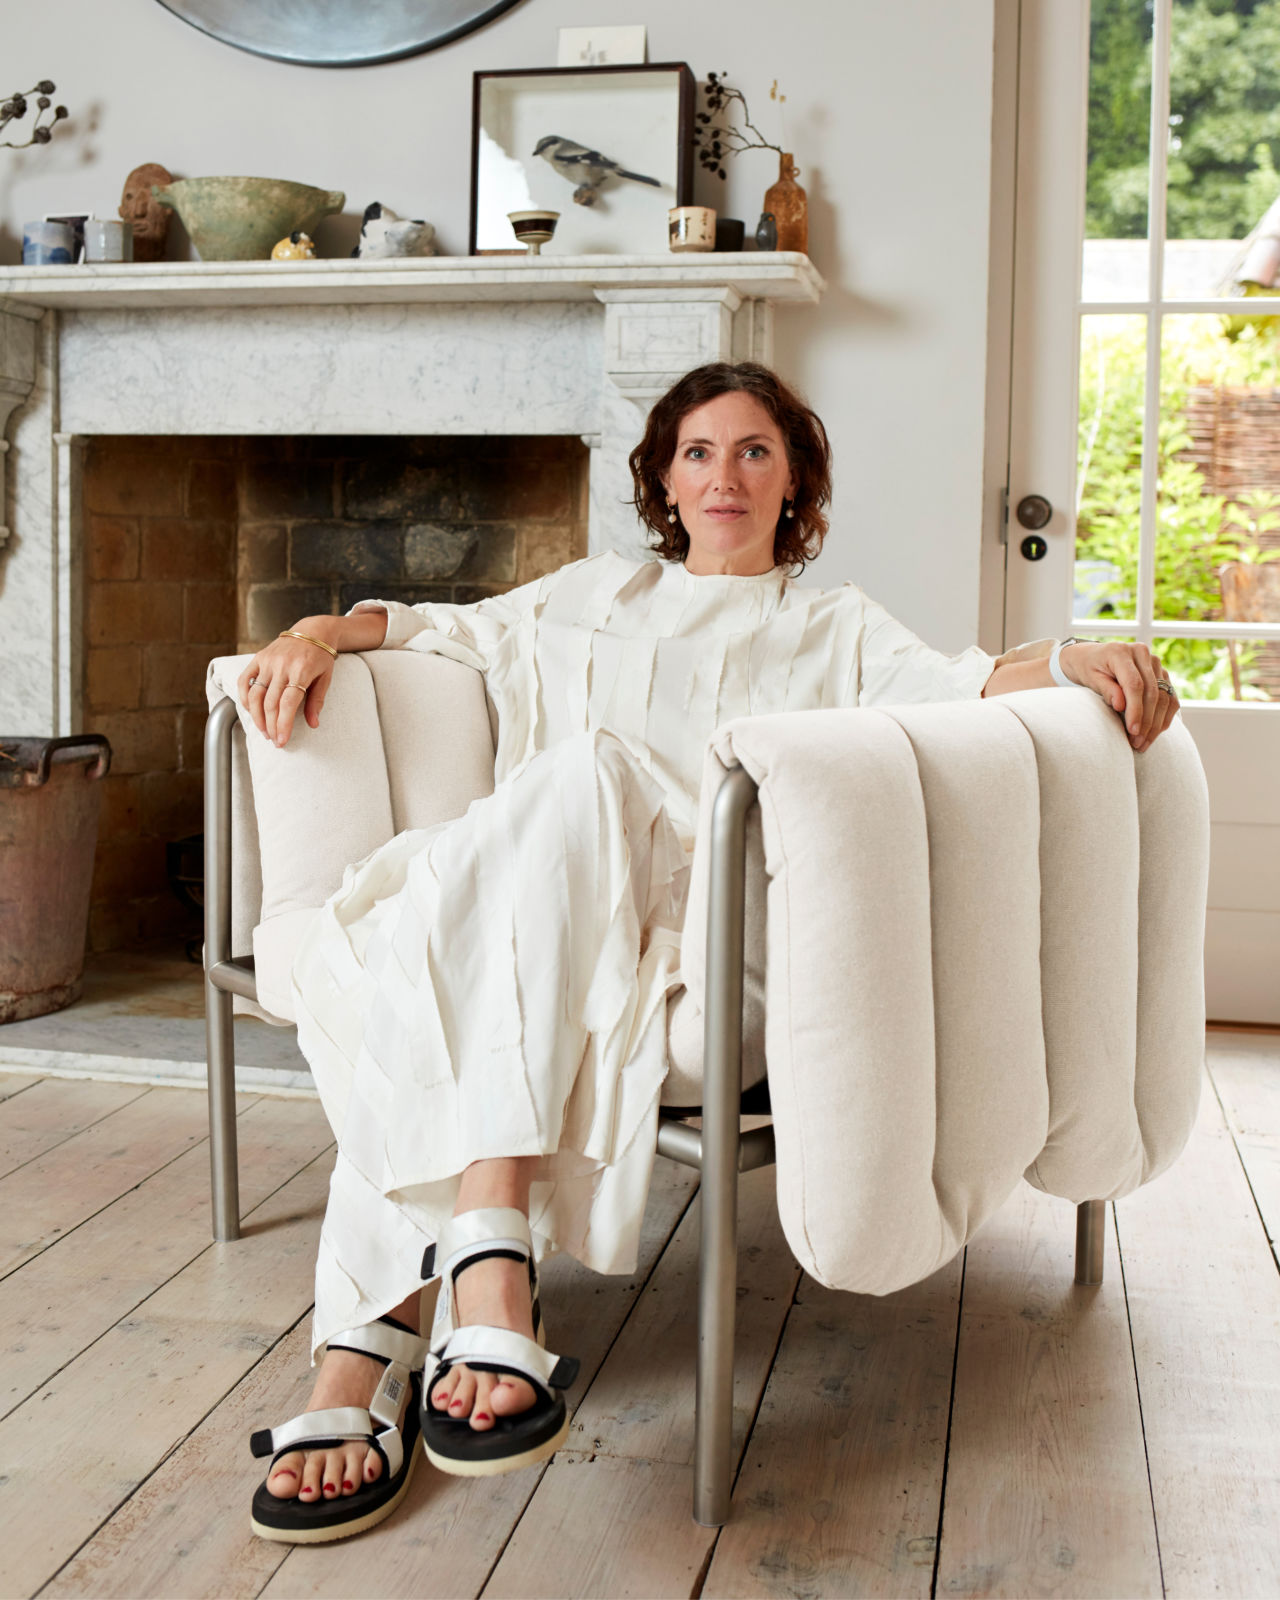 An editorial image of designer Faye Toogood sitting in her own design, the Puffy Lounge Chair in Natural / Stainless.